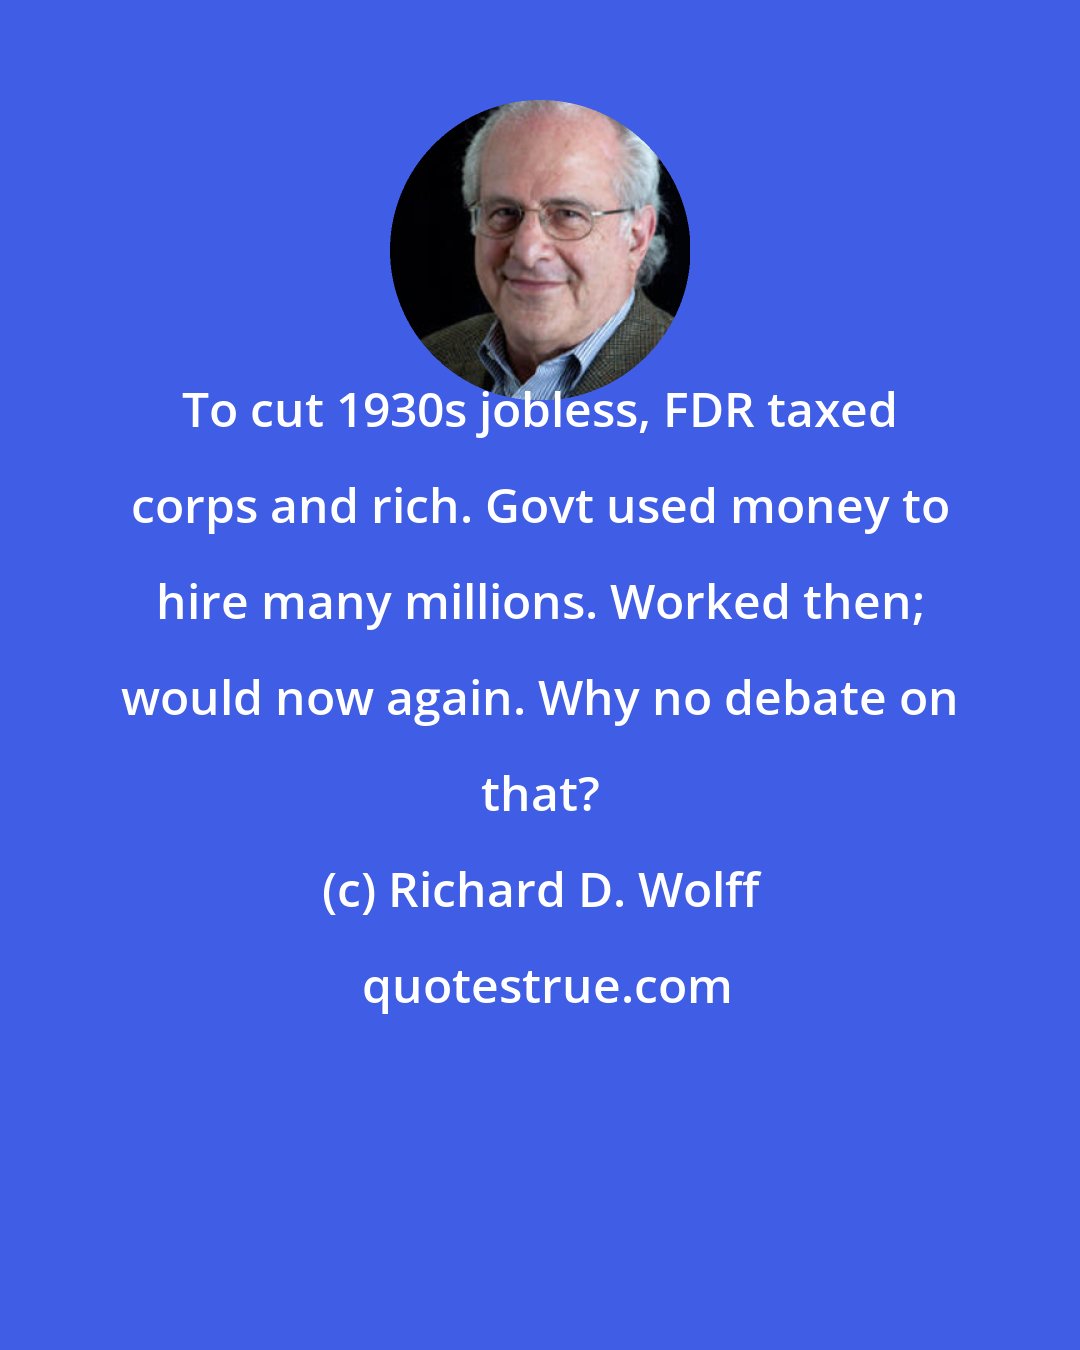 Richard D. Wolff: To cut 1930s jobless, FDR taxed corps and rich. Govt used money to hire many millions. Worked then; would now again. Why no debate on that?